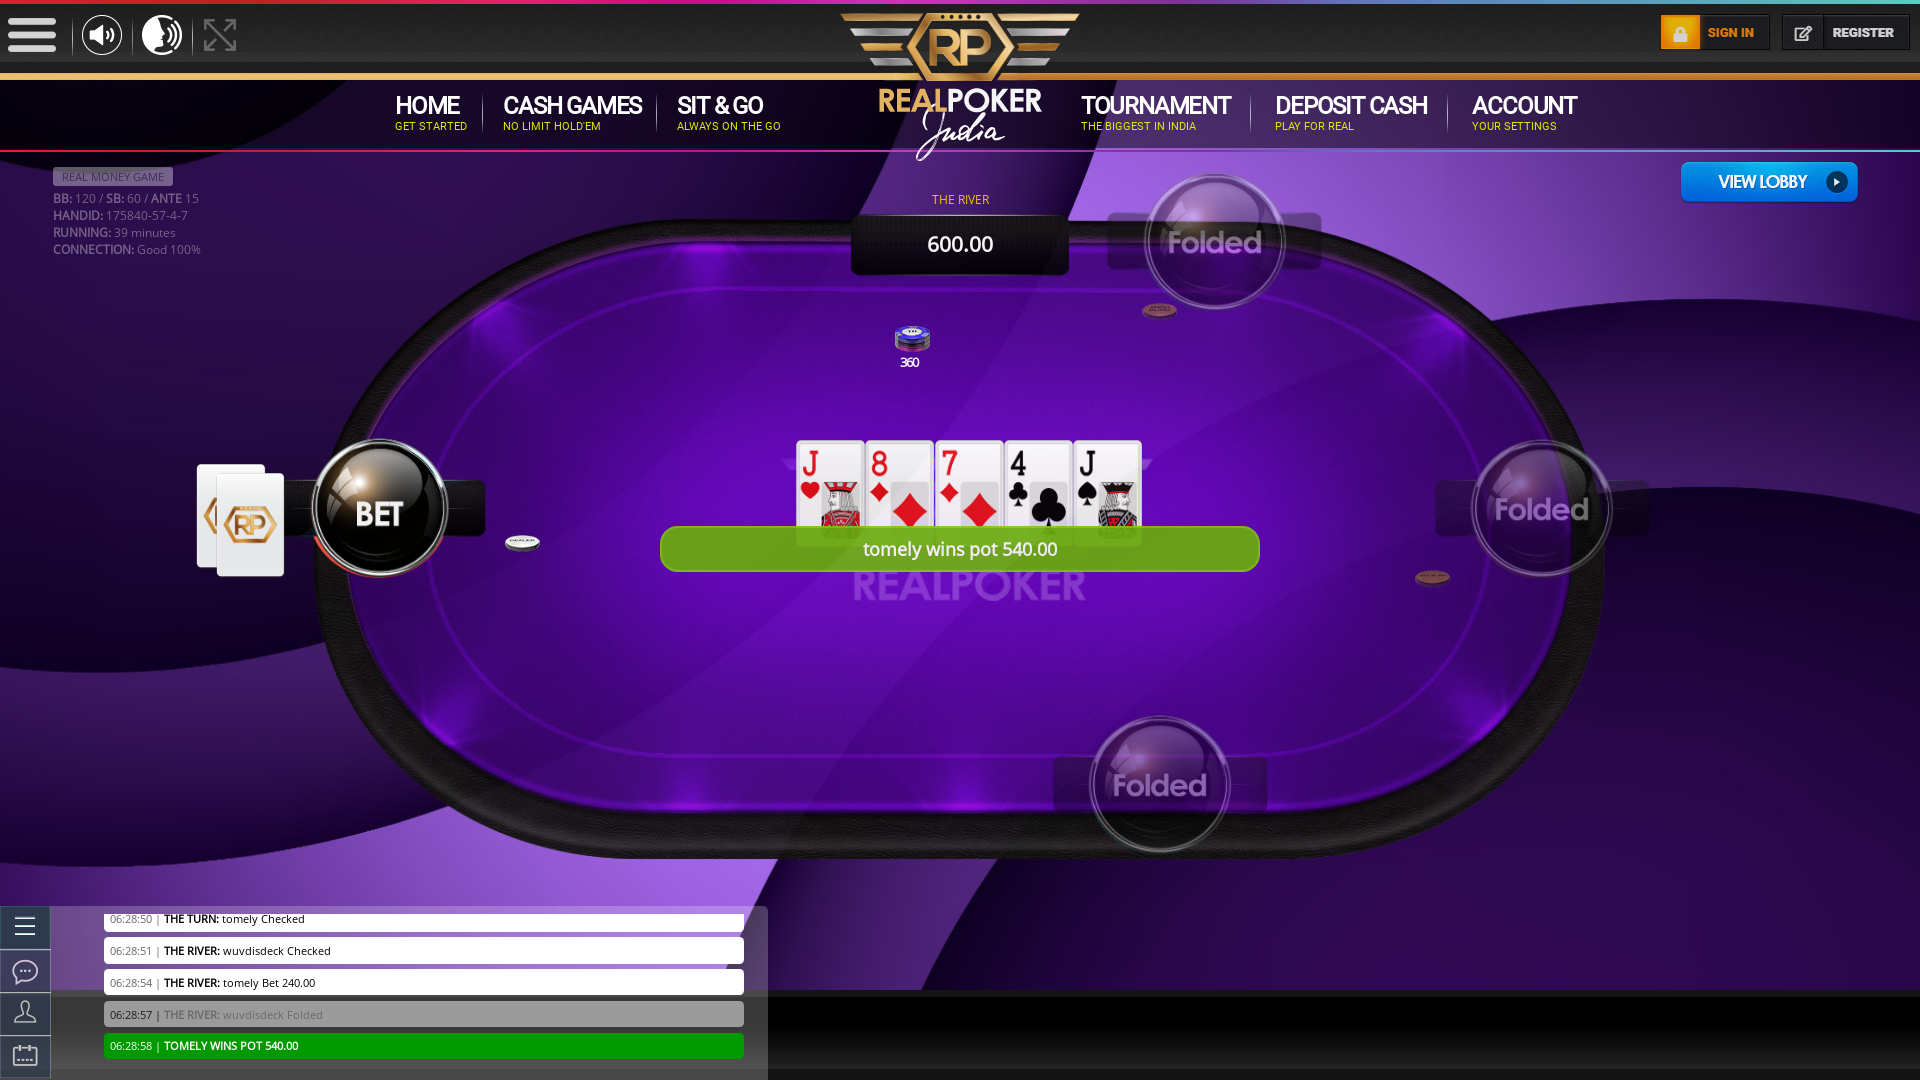 Nizamuddin, New Delhi poker table on a 10 player table in the 39th minute of the game